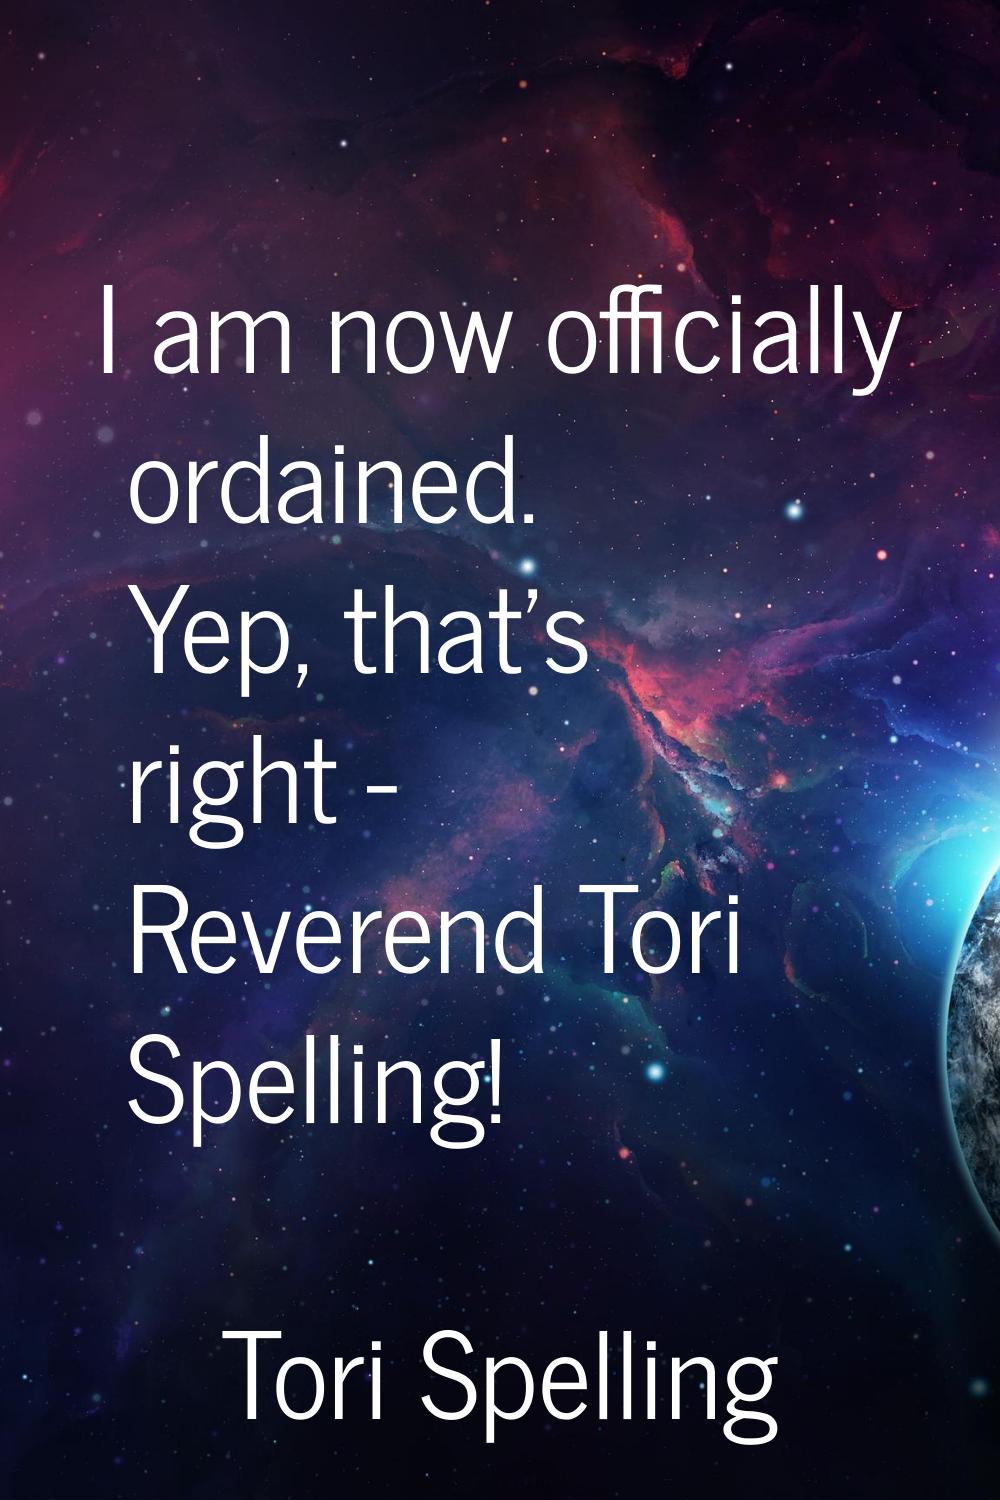 I am now officially ordained. Yep, that's right - Reverend Tori Spelling!